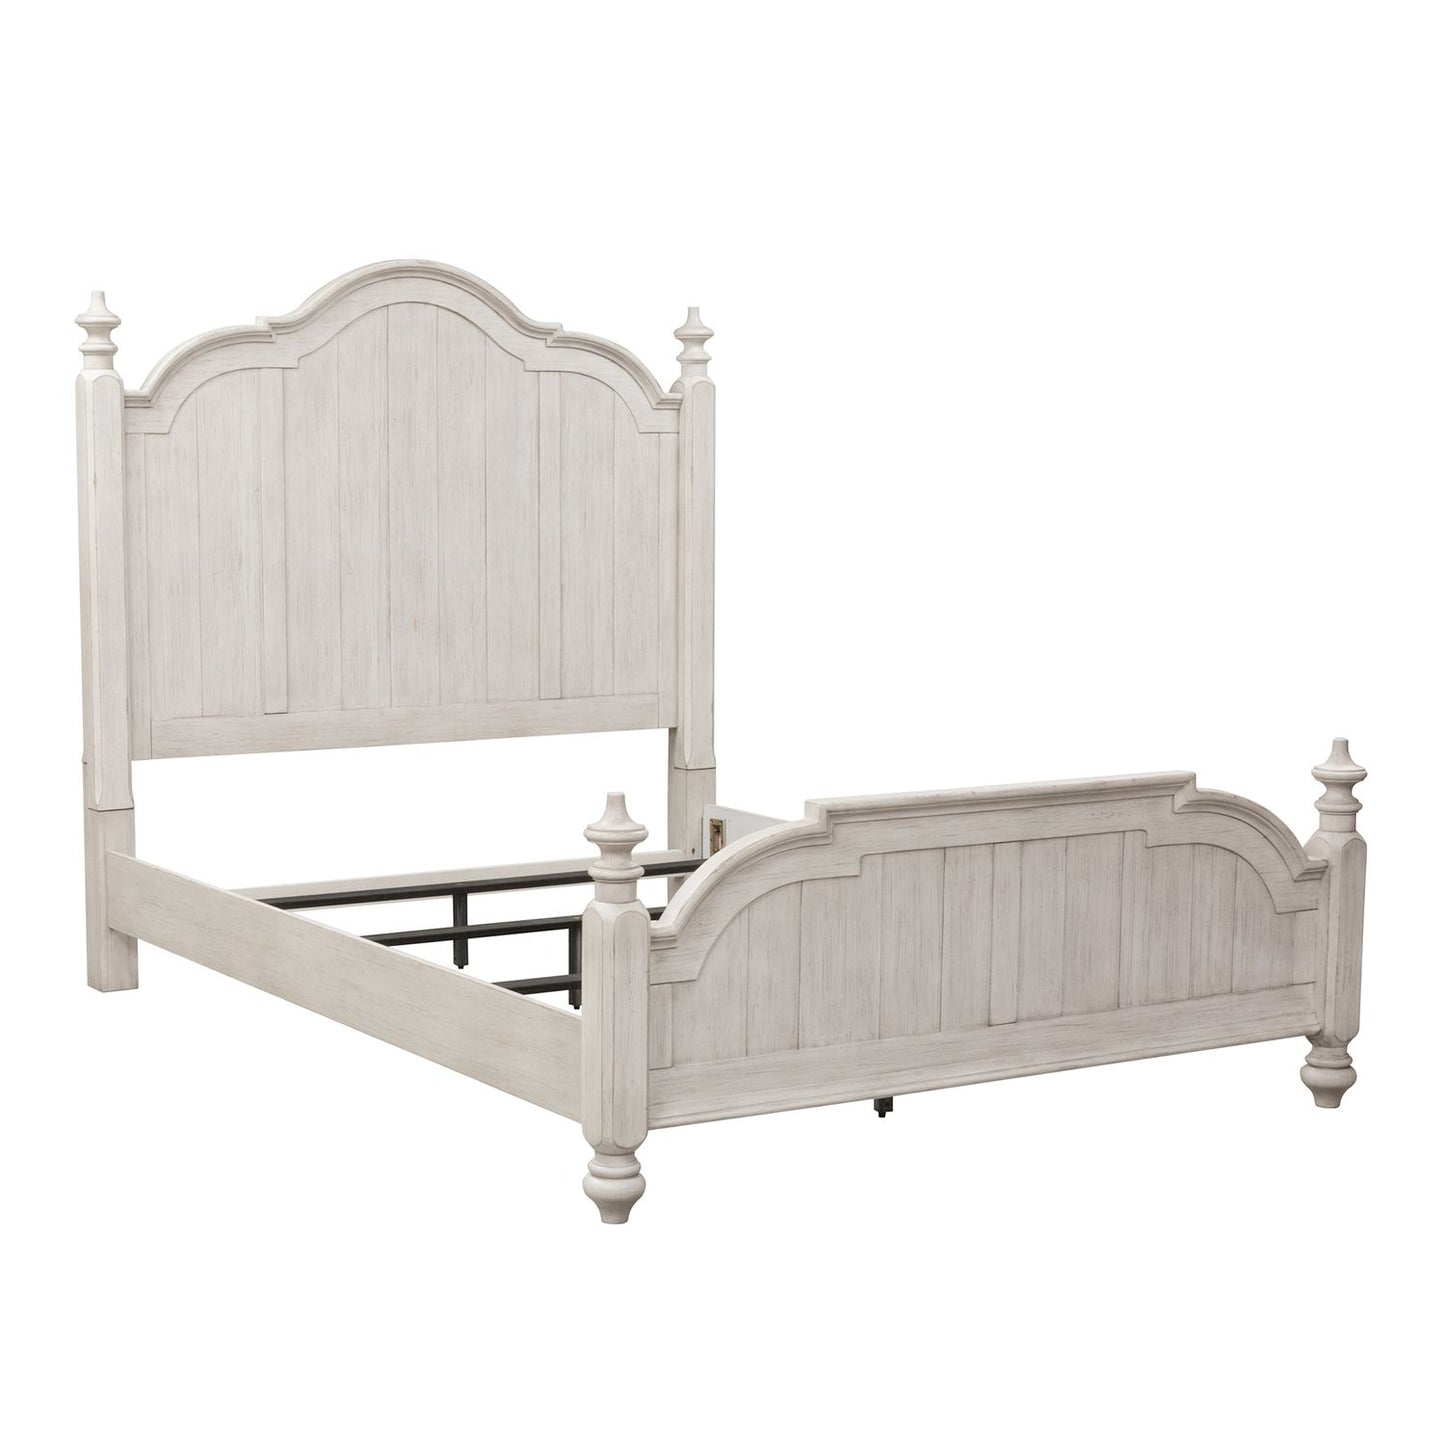 Farmhouse Reimagined - Queen Poster Bed